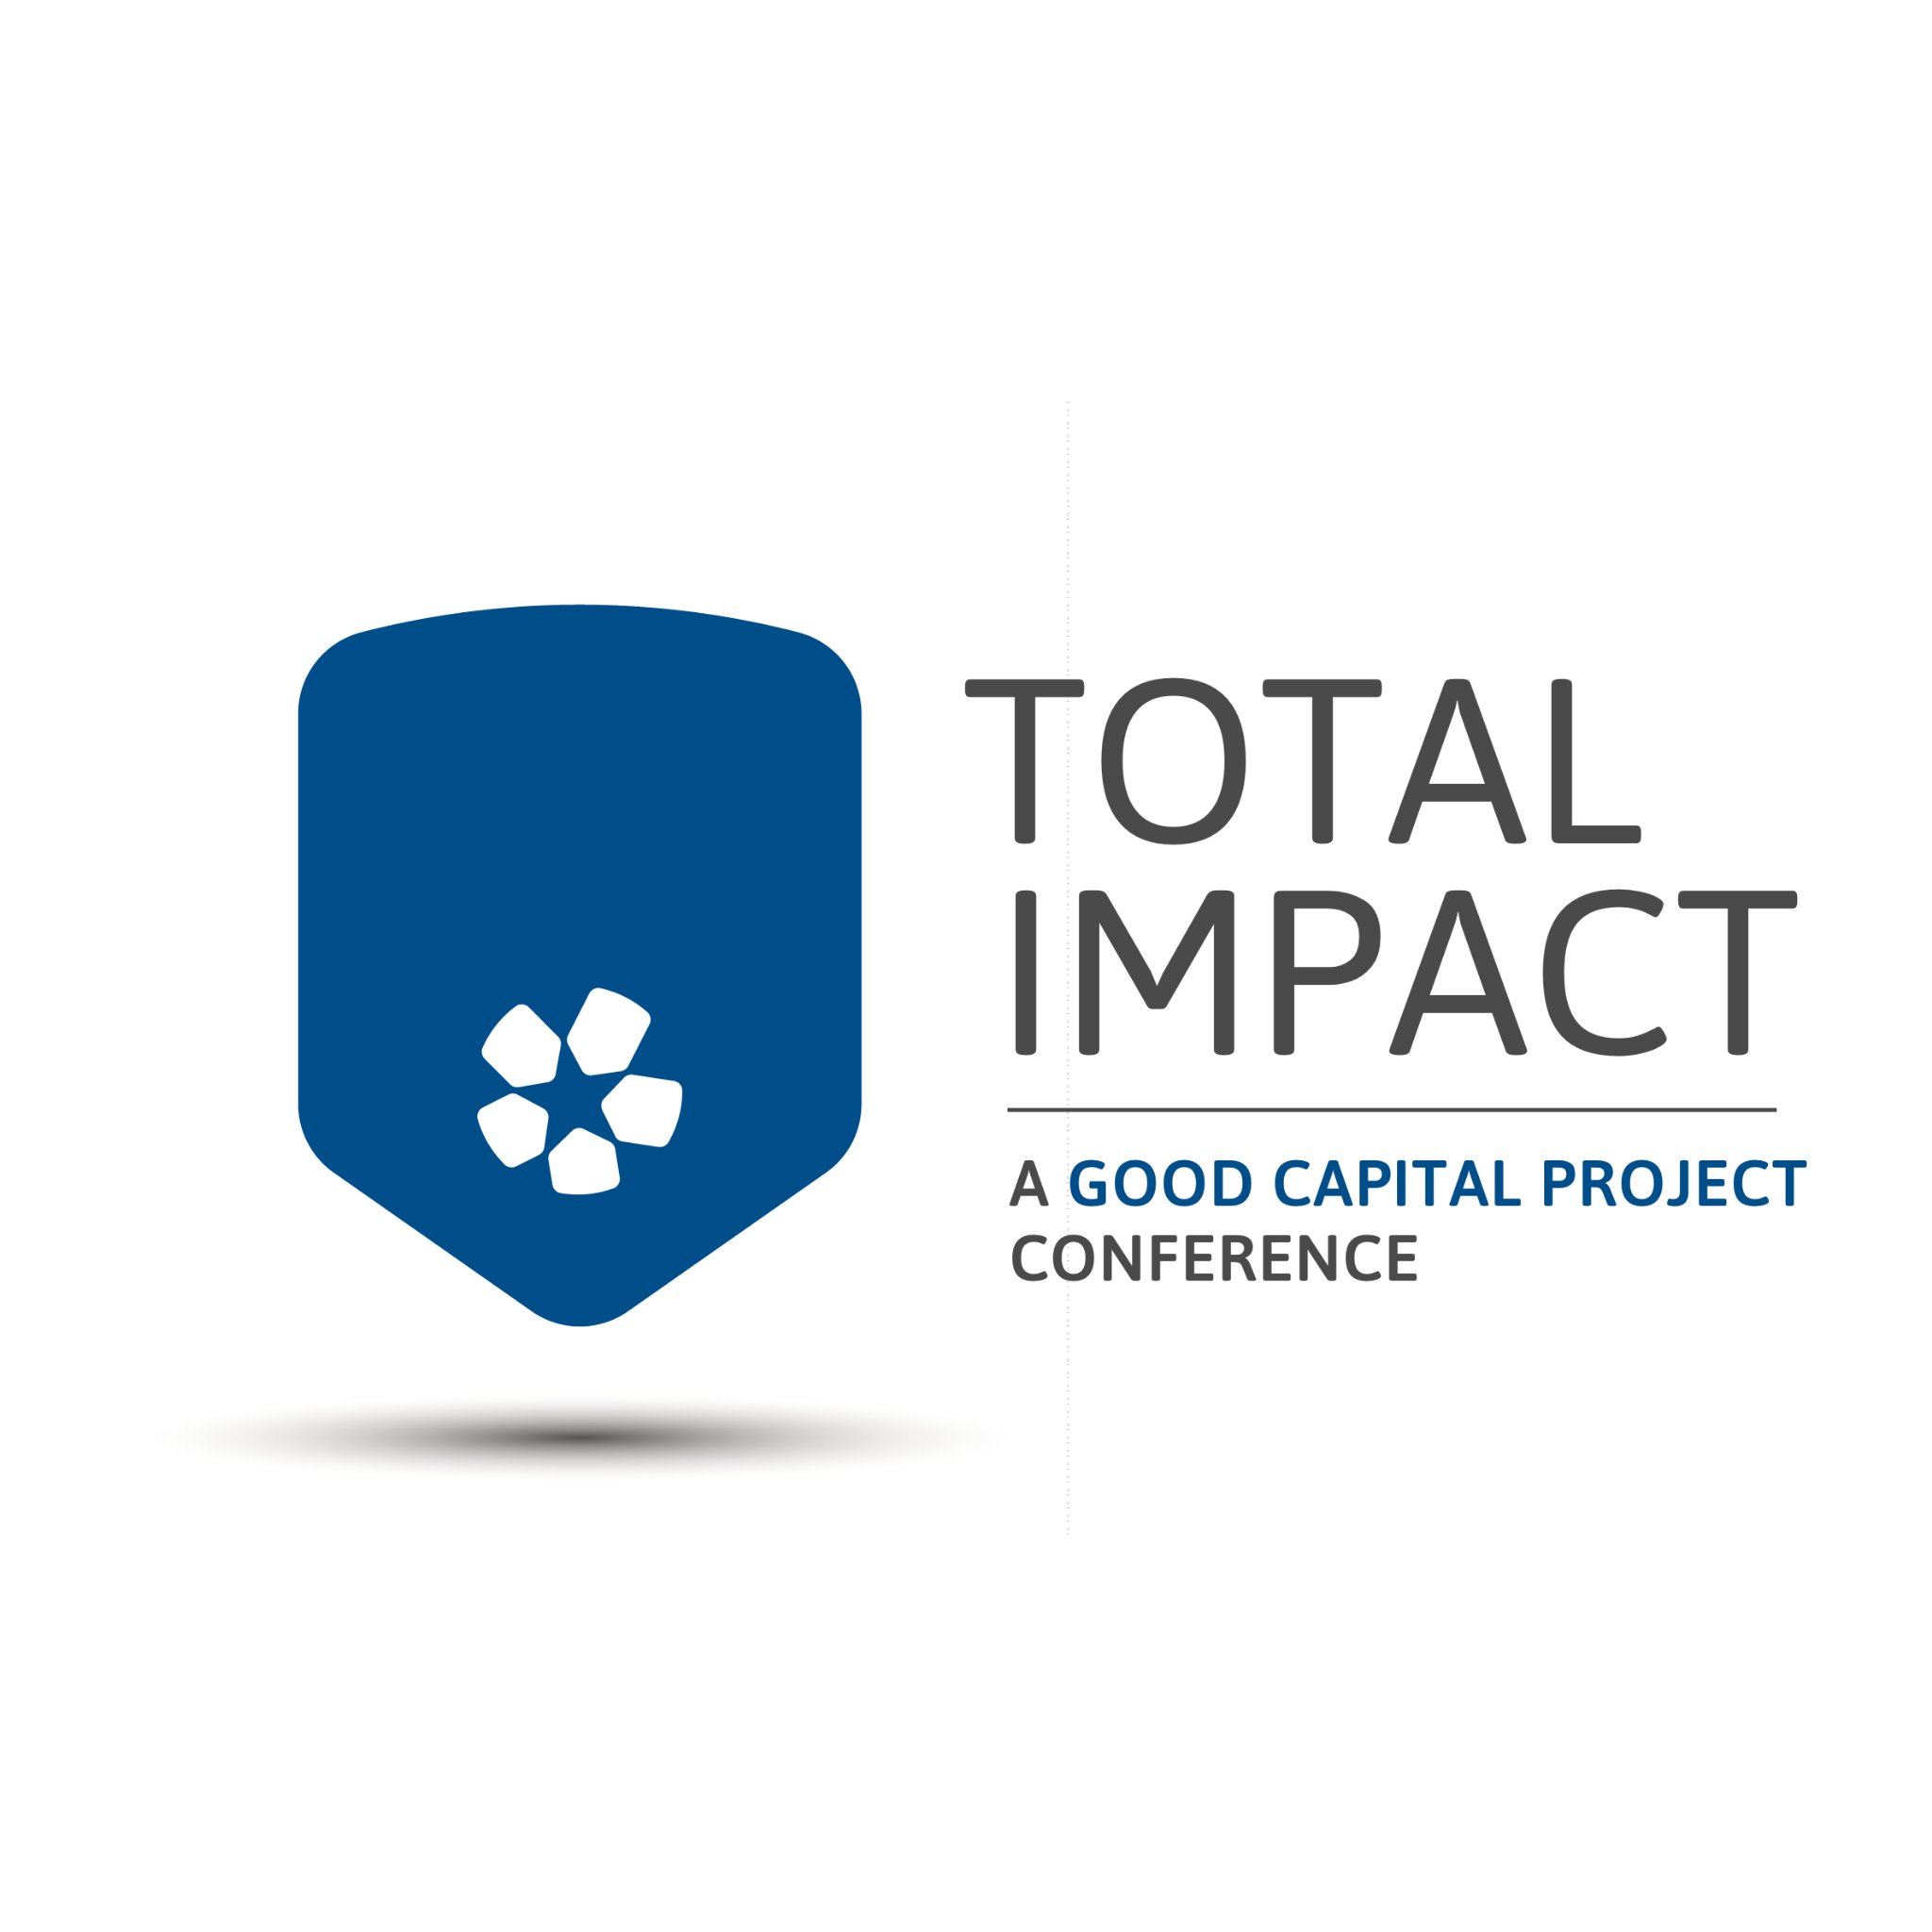 #TotalImpact is an #impinv convening series for financial advisors and investors seeking financial and social returns. Join us in Philadelphia on May 1-2, 2019!